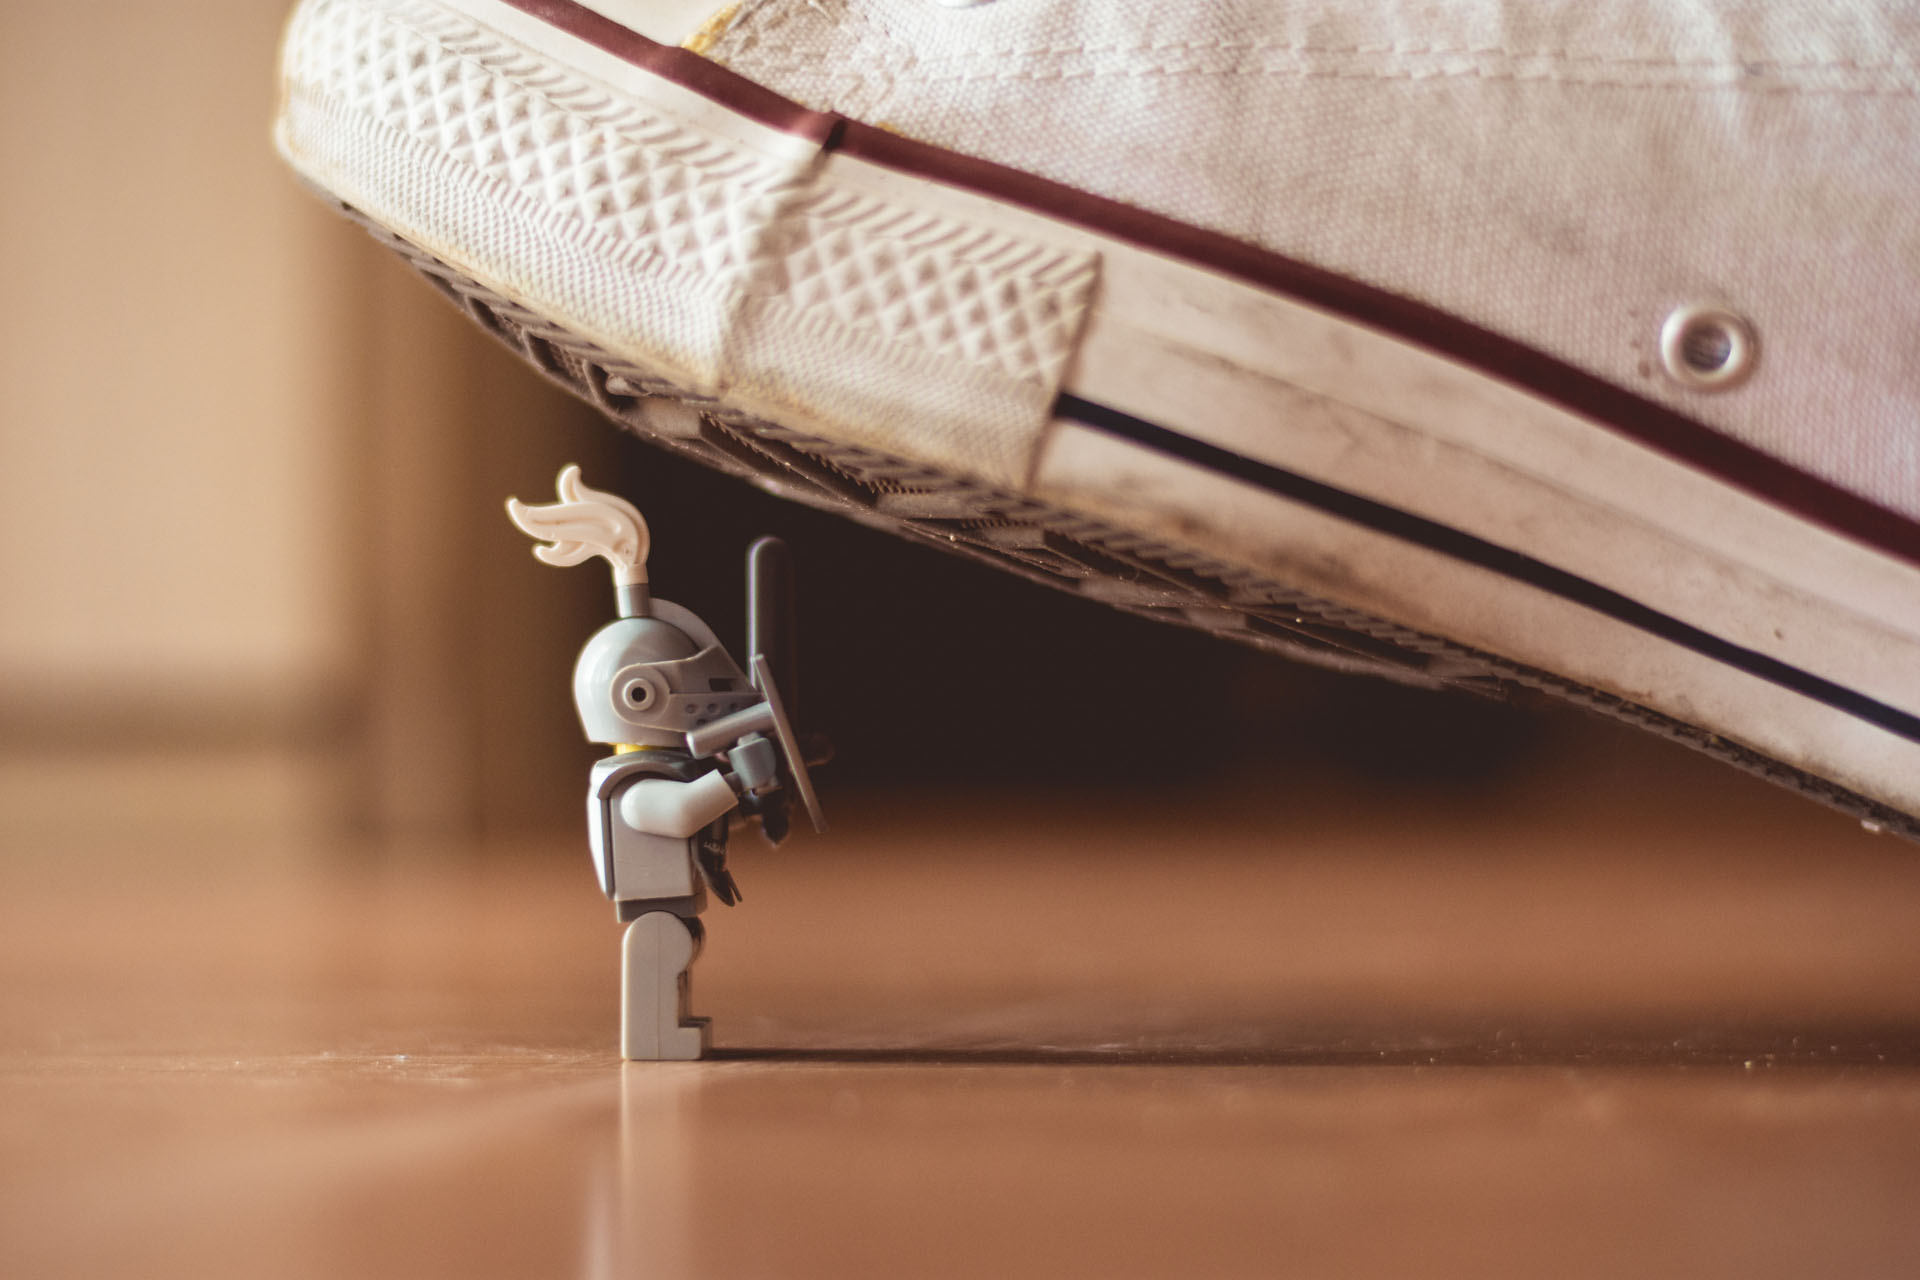 small lego knight showing resilience with a running shoe threatening to step on him